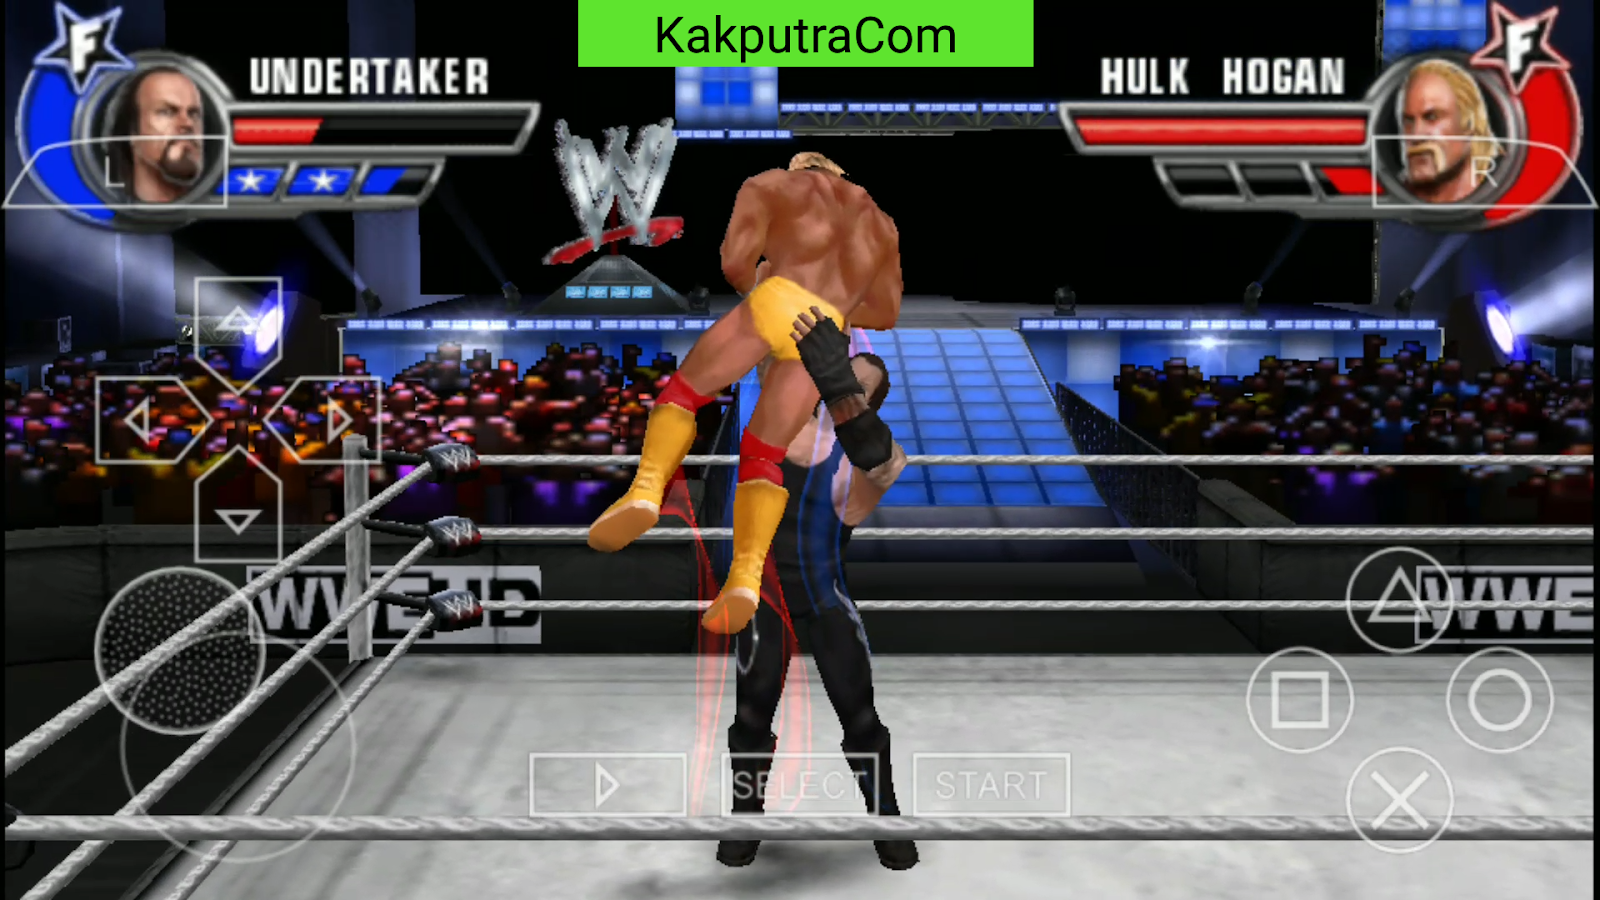 wwe iso psp download 100mb